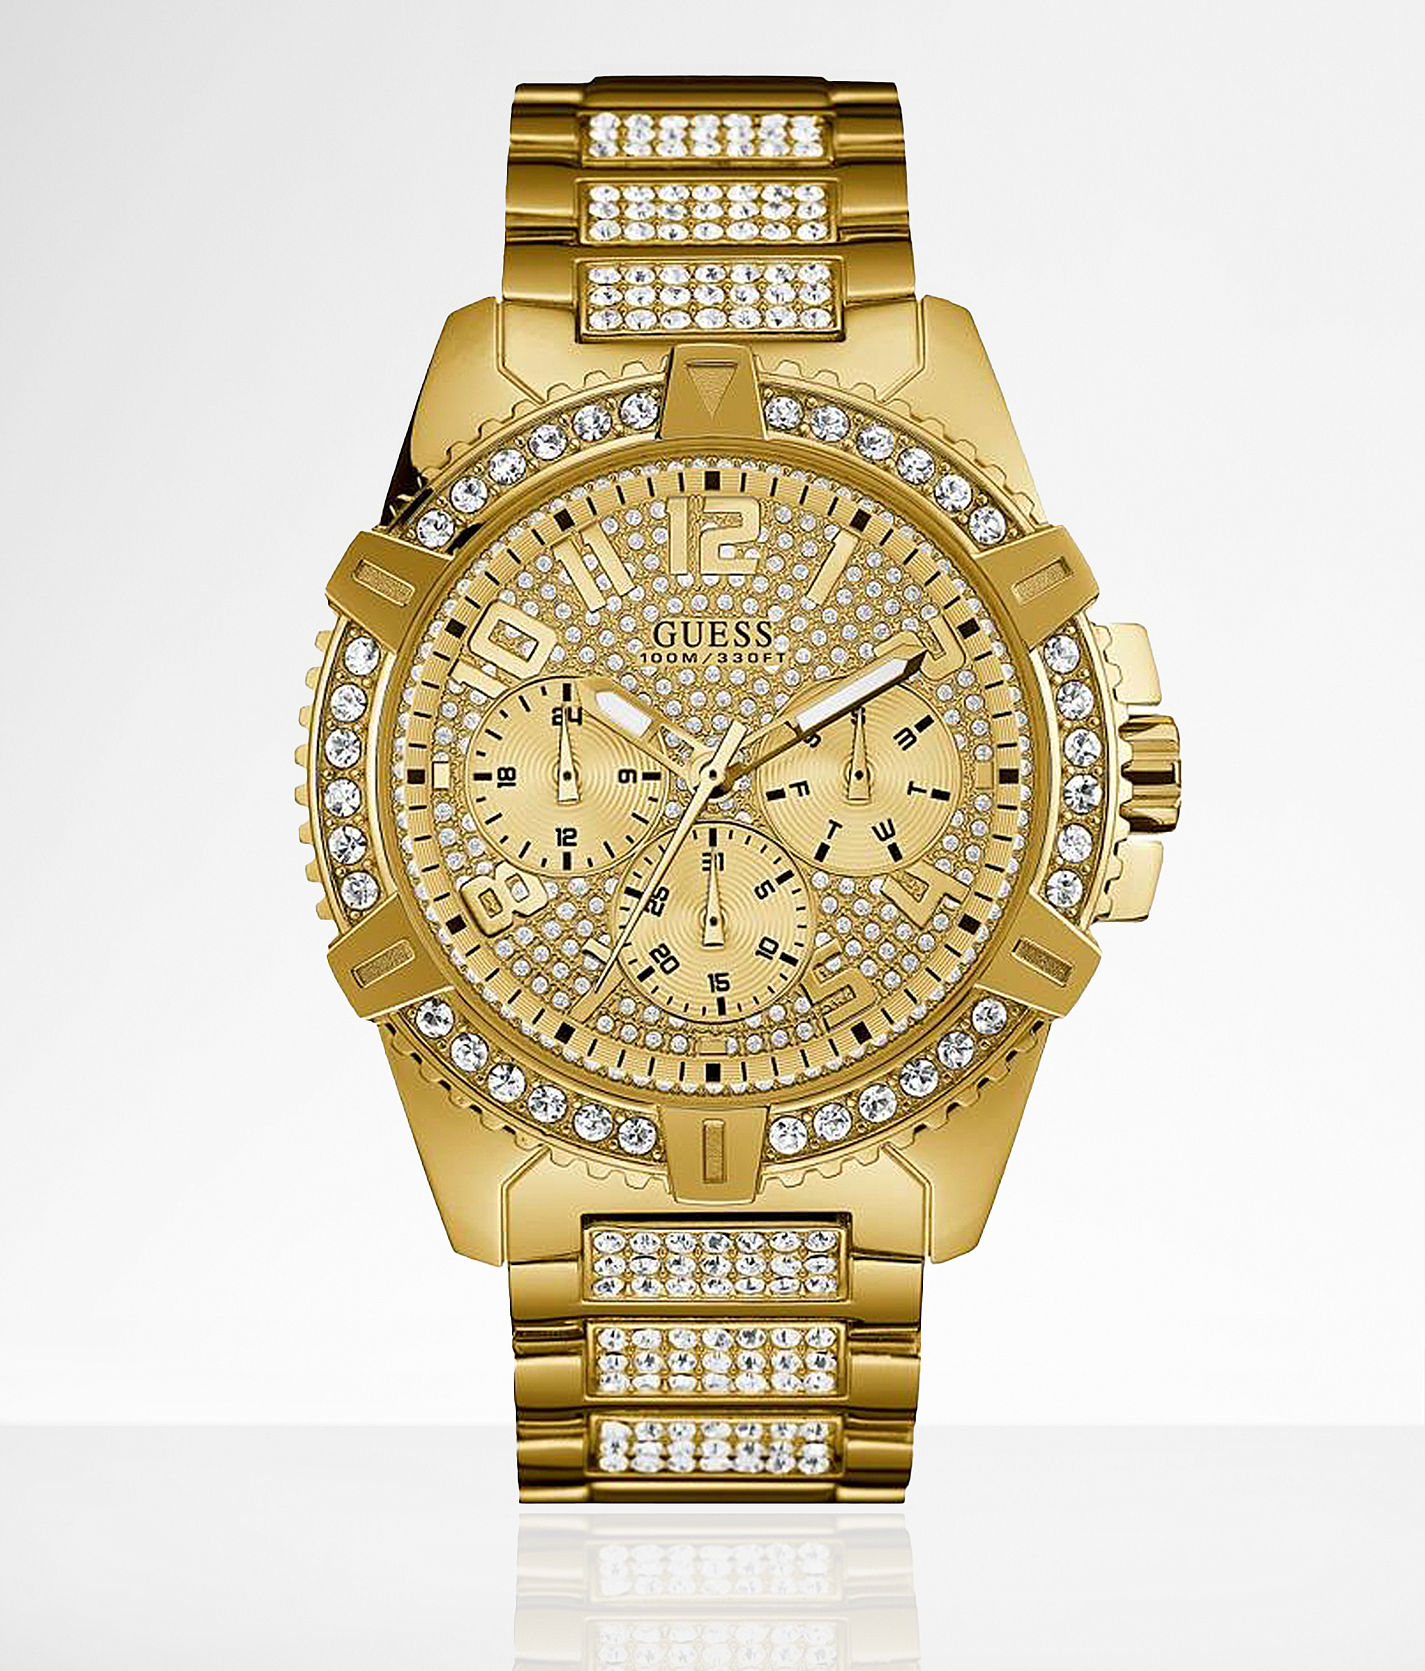 Guess Crystal Watch - Men's Watches in Gold Buckle